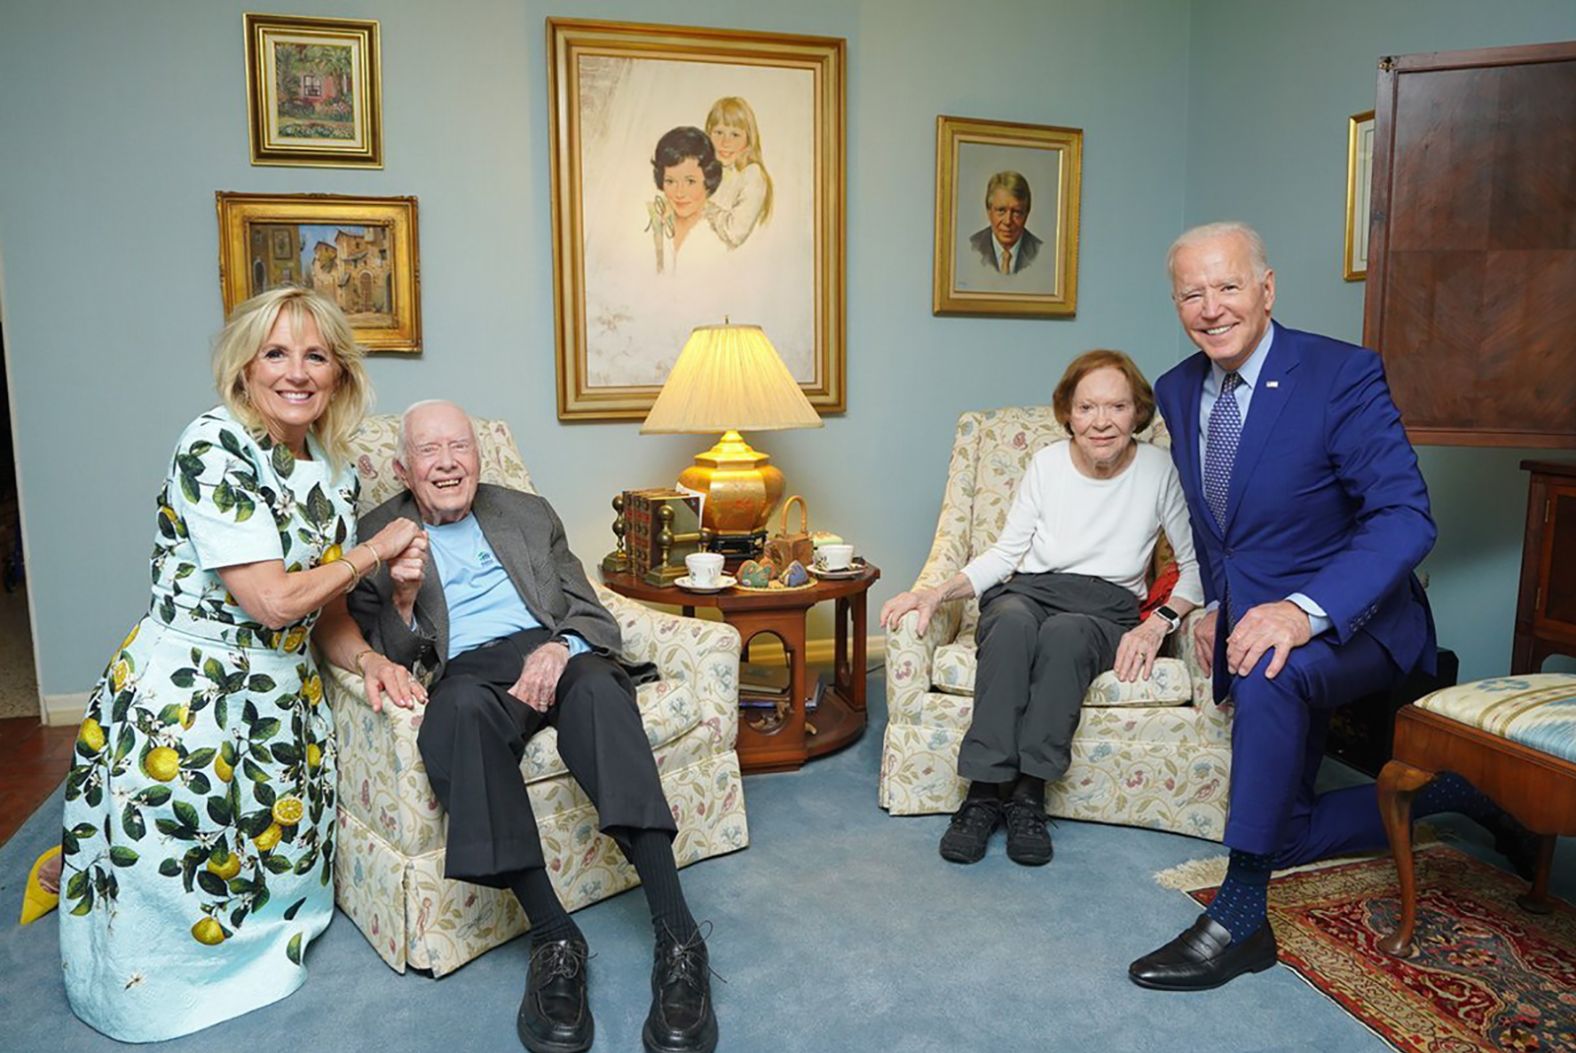 President Joe Biden and first lady Jill Biden <a href="https://www.cnn.com/2021/04/29/politics/bidens-carters-visit-georgia/index.html" target="_blank">met with the Carters</a> at the Carters' home in April 2021. The photo grabbed people's attention on social media because of what appeared to be a significant size difference between the two couples. While many experts theorized that it was the result of a wide-angle lens, Adam Schultz, the chief official White House photographer, declined to explain <a href="https://www.nytimes.com/2021/05/05/us/politics/biden-carters-photo.html" target="_blank" target="_blank">when reached by The New York Times.</a>